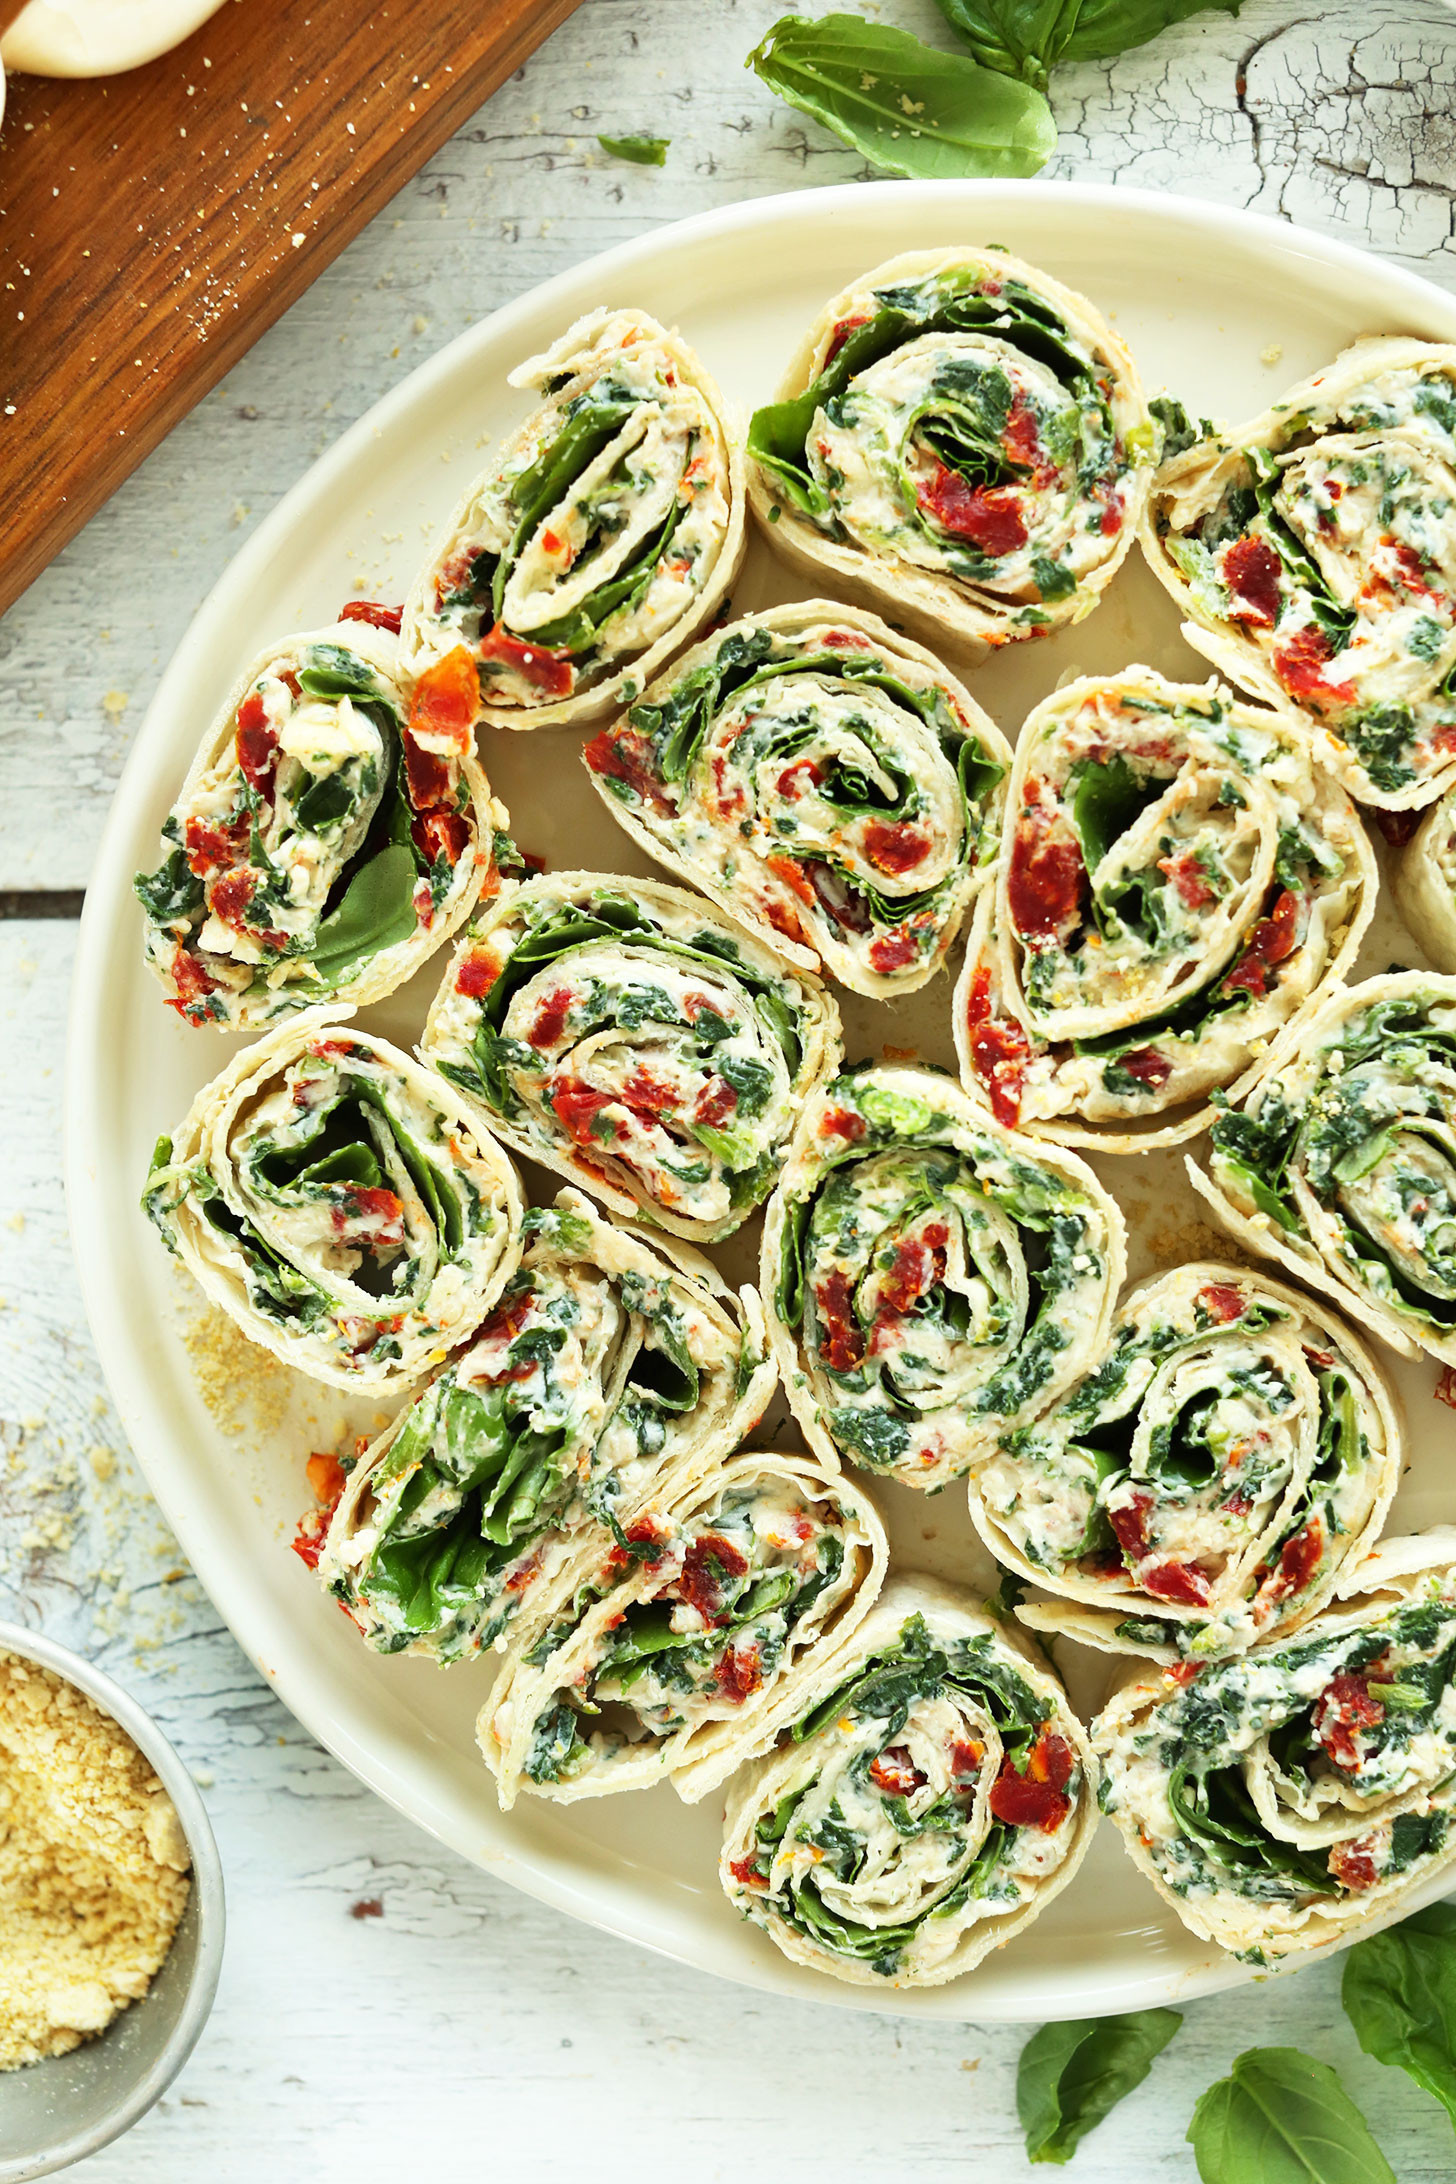 Healthy Vegetarian Appetizers Unique 30 the Best Ideas for Gluten Free Ve Arian Appetizers